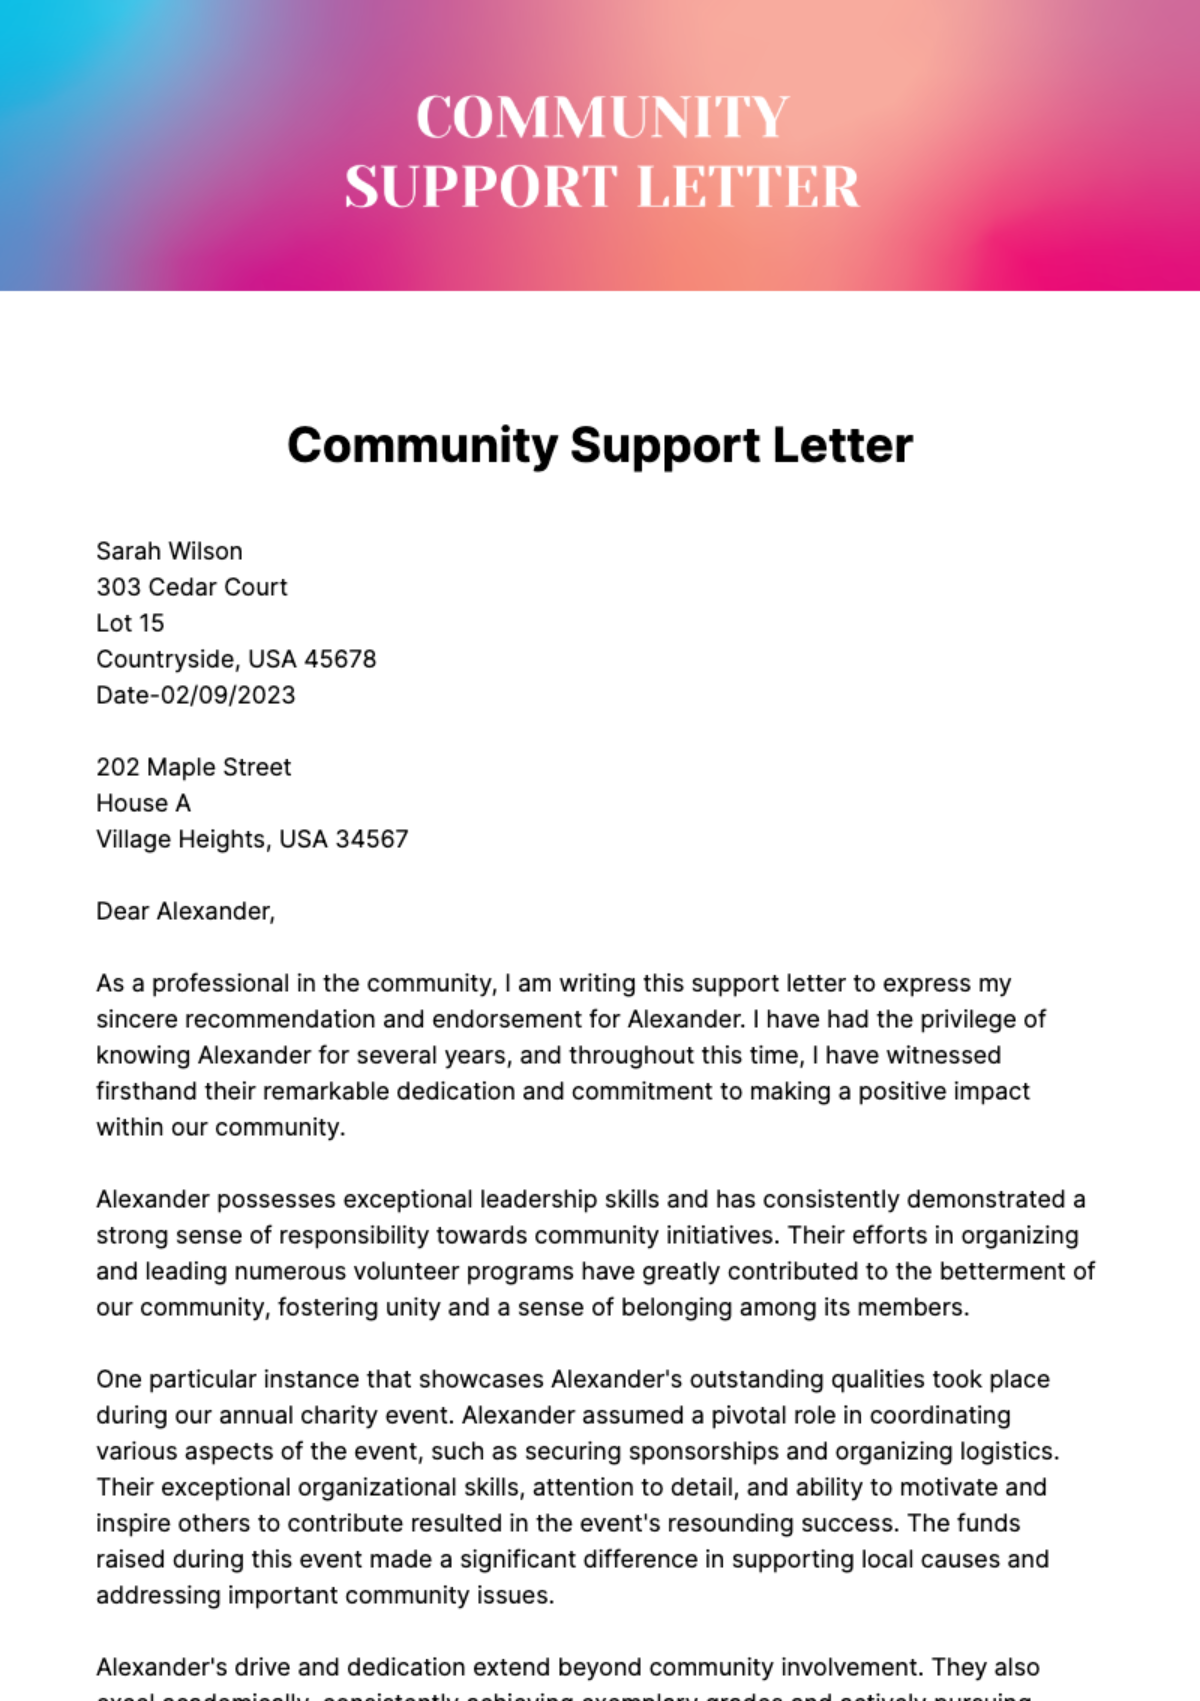 Free Community Support Letter Template